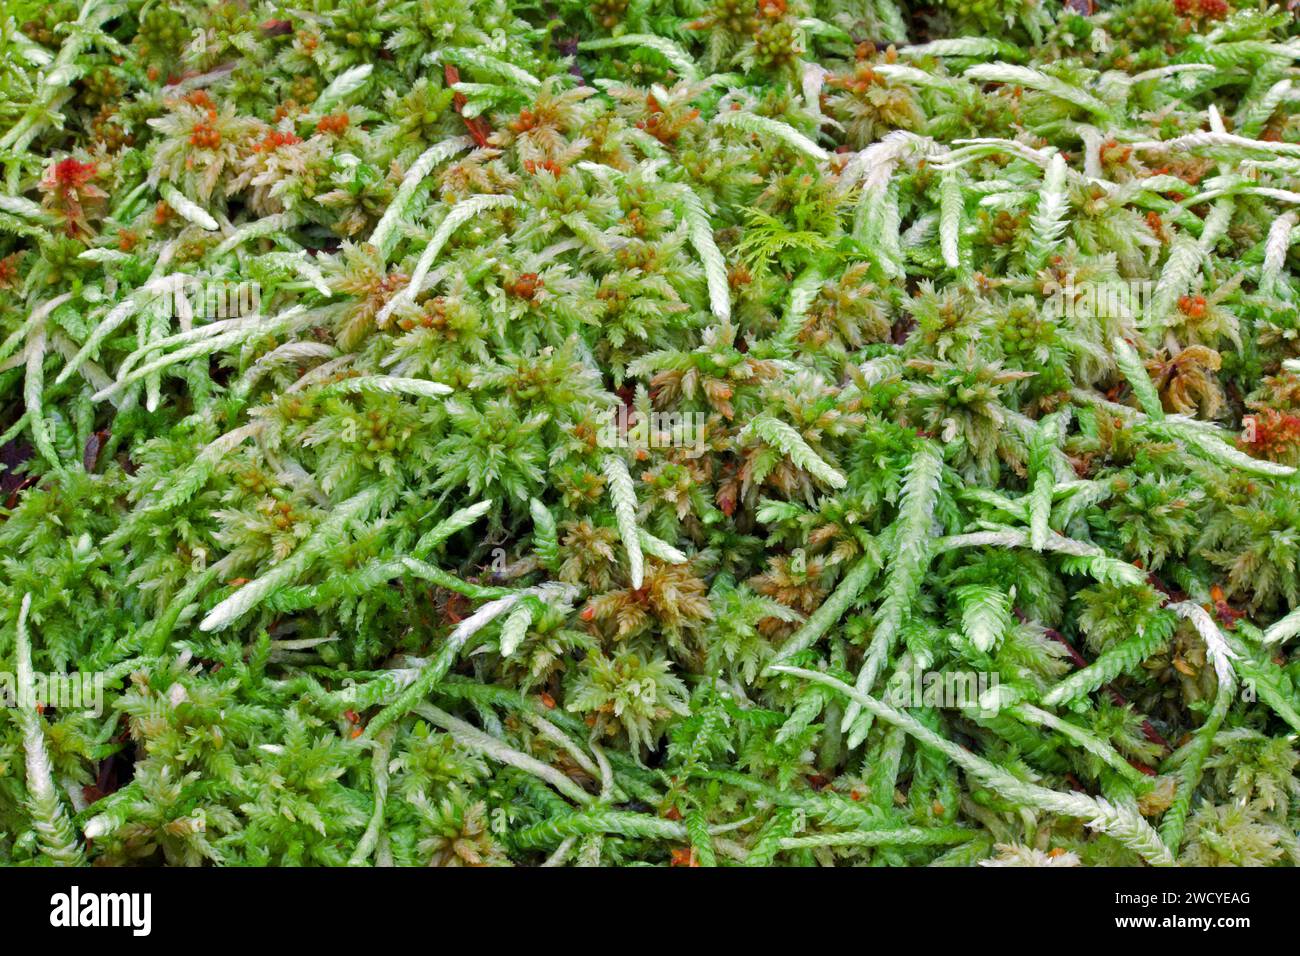 Plagiothecium undulatum (wavy-leaved cotton moss) is seen here amongst Sphagnum moss. It is found in acidic soil and on wood and rocks. Stock Photo